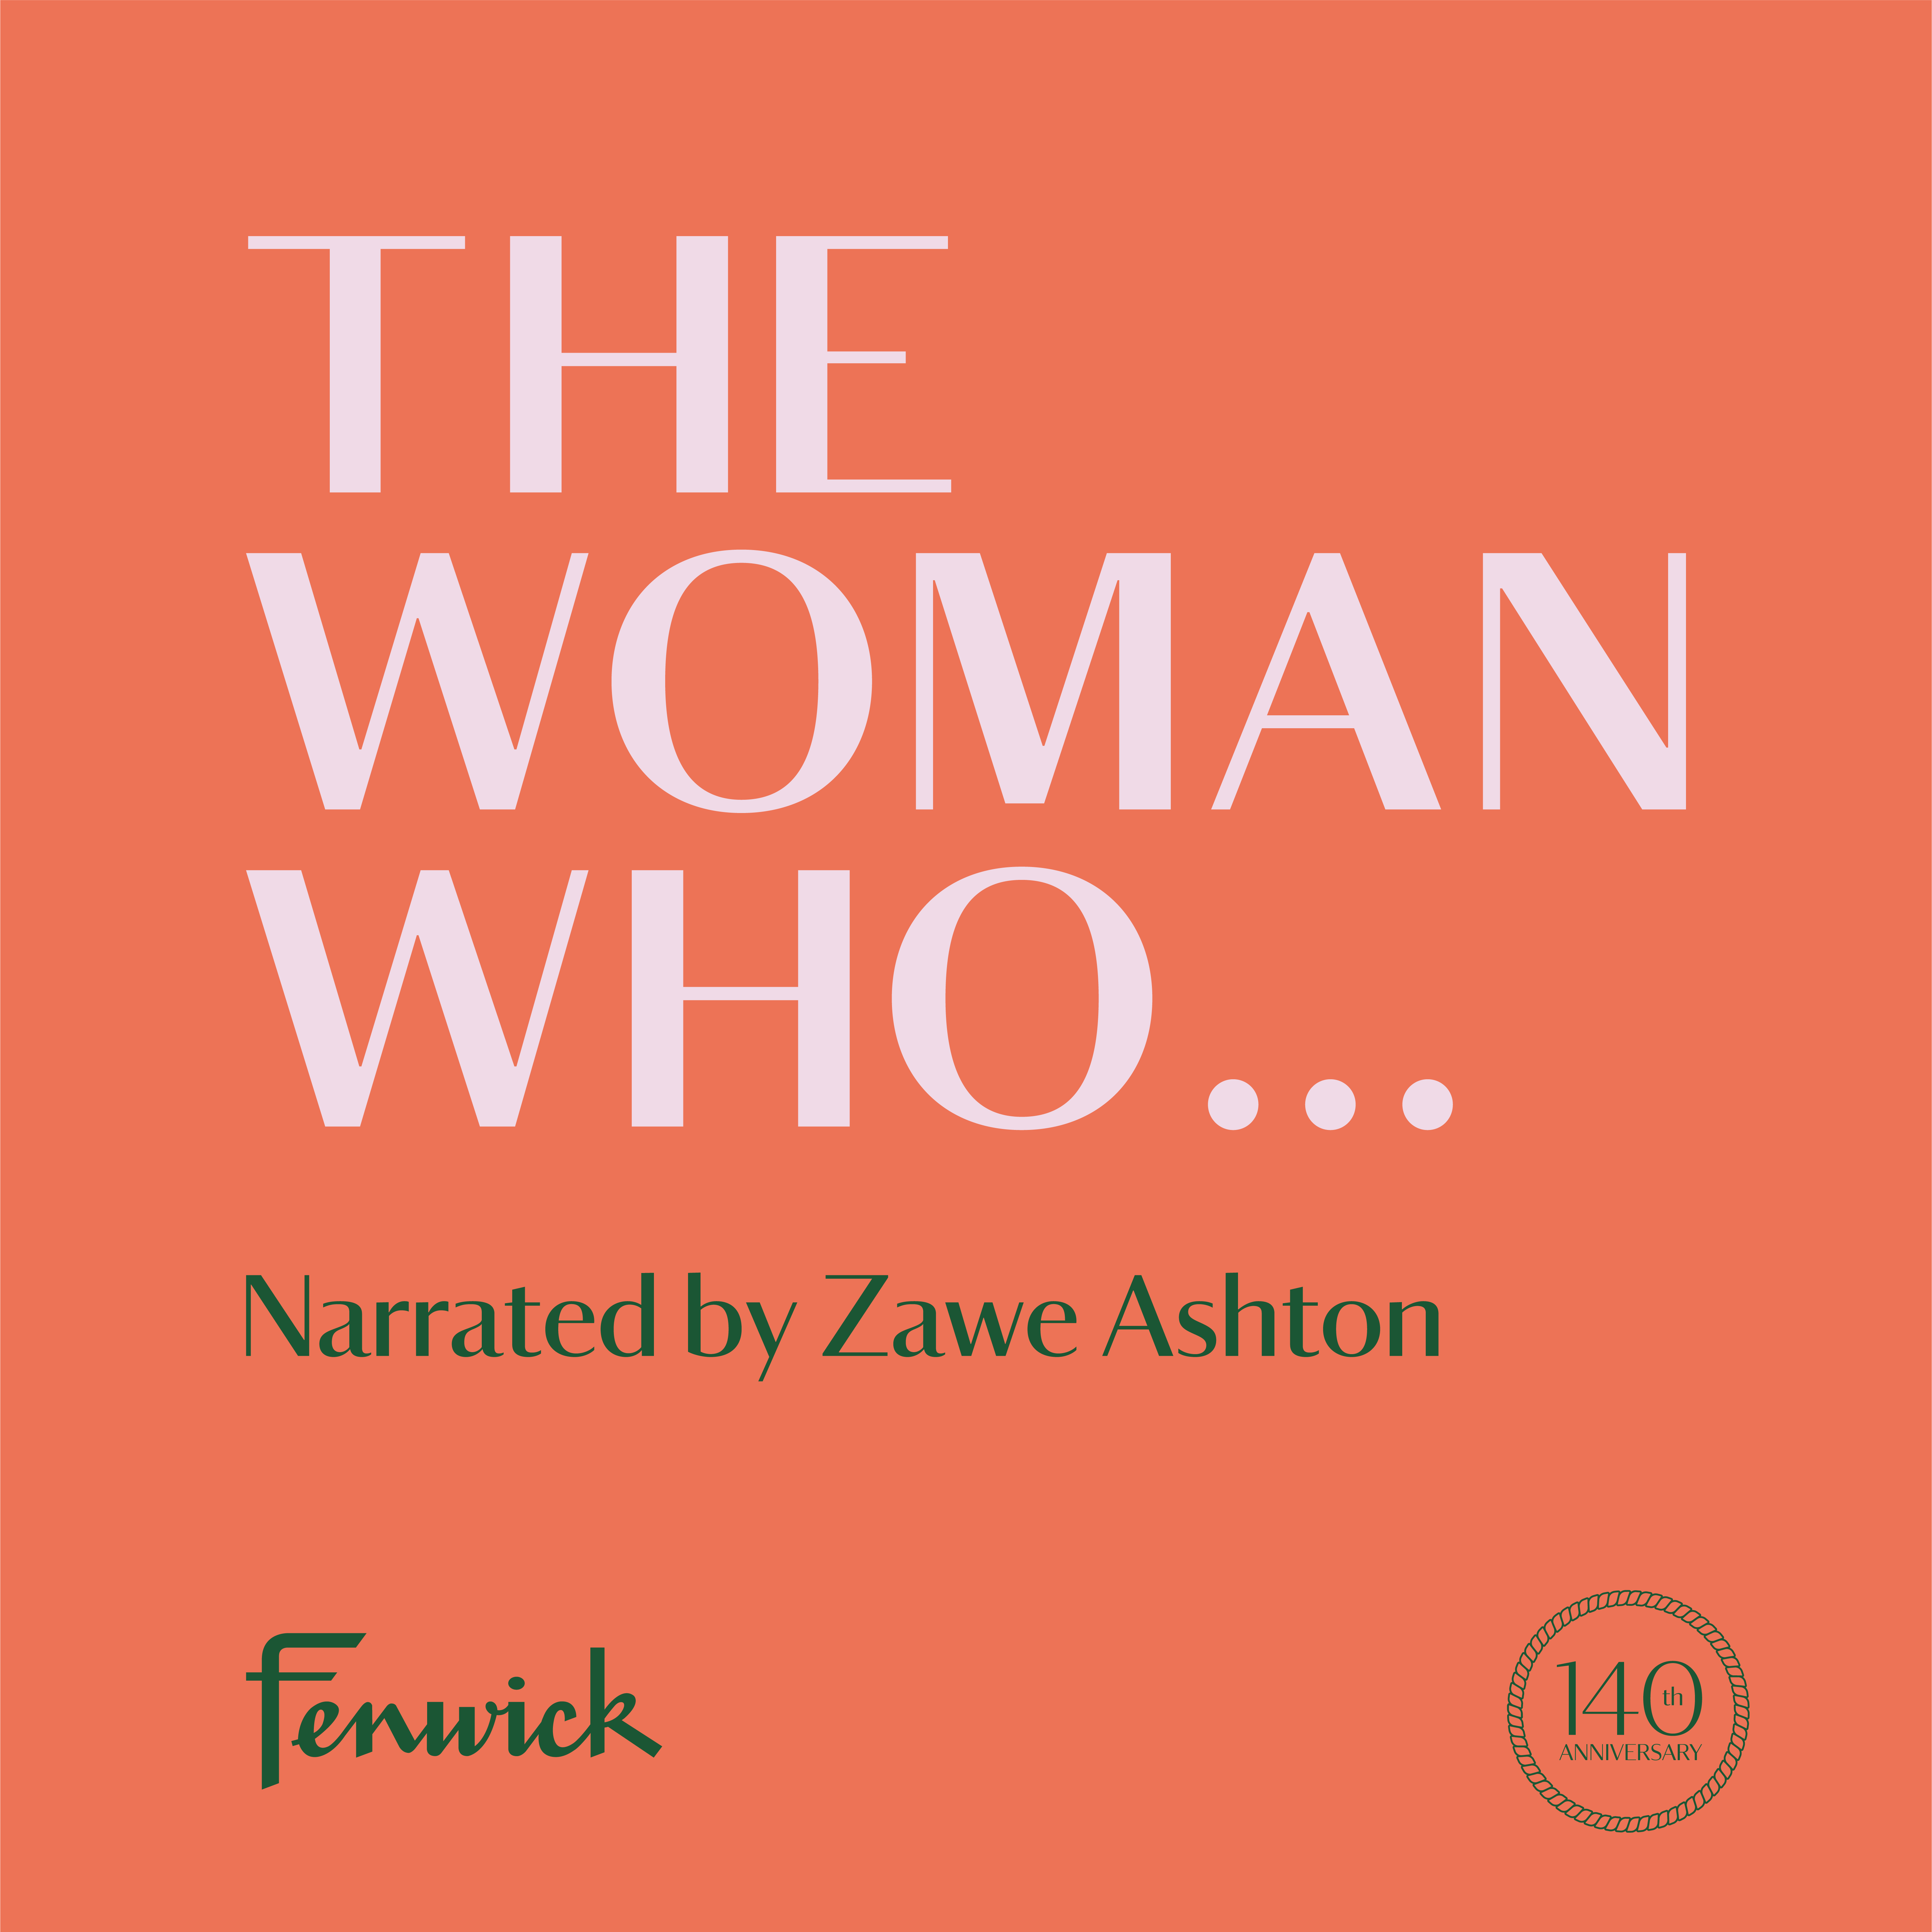 The Woman Who Fenwick podcast